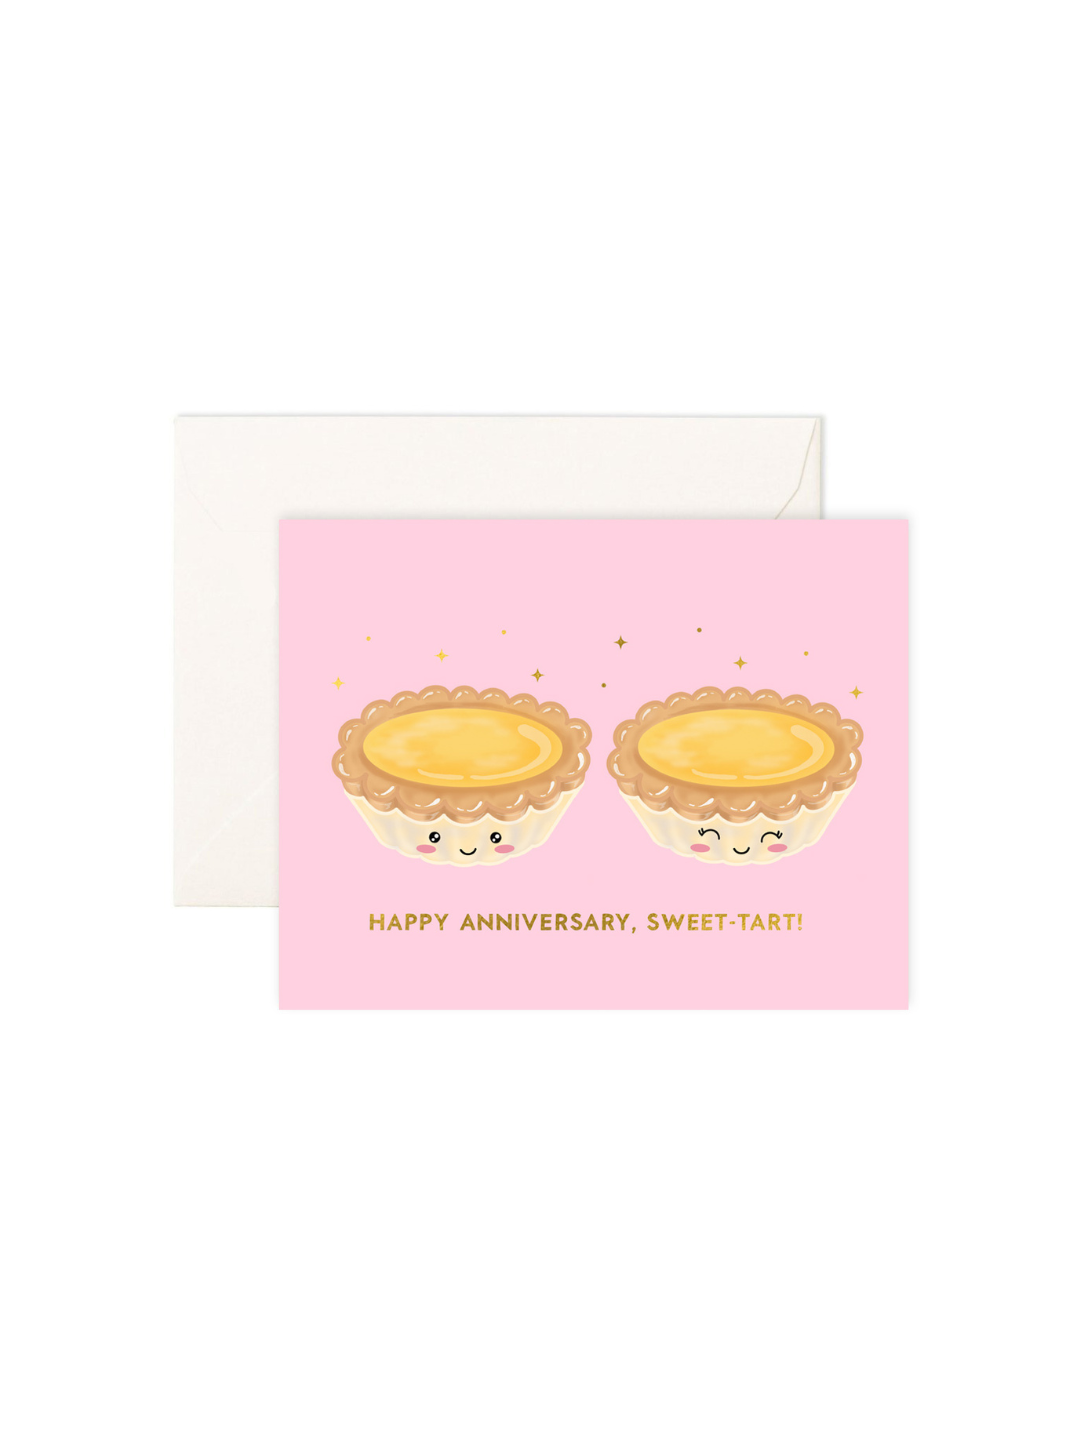 Eco-friendly greeting card printed on recycled paper cute food-inspired design shop sustainable ethical brands women-owned brands kind on the planet wedding anniversary card egg tart Hong Kong foodie design